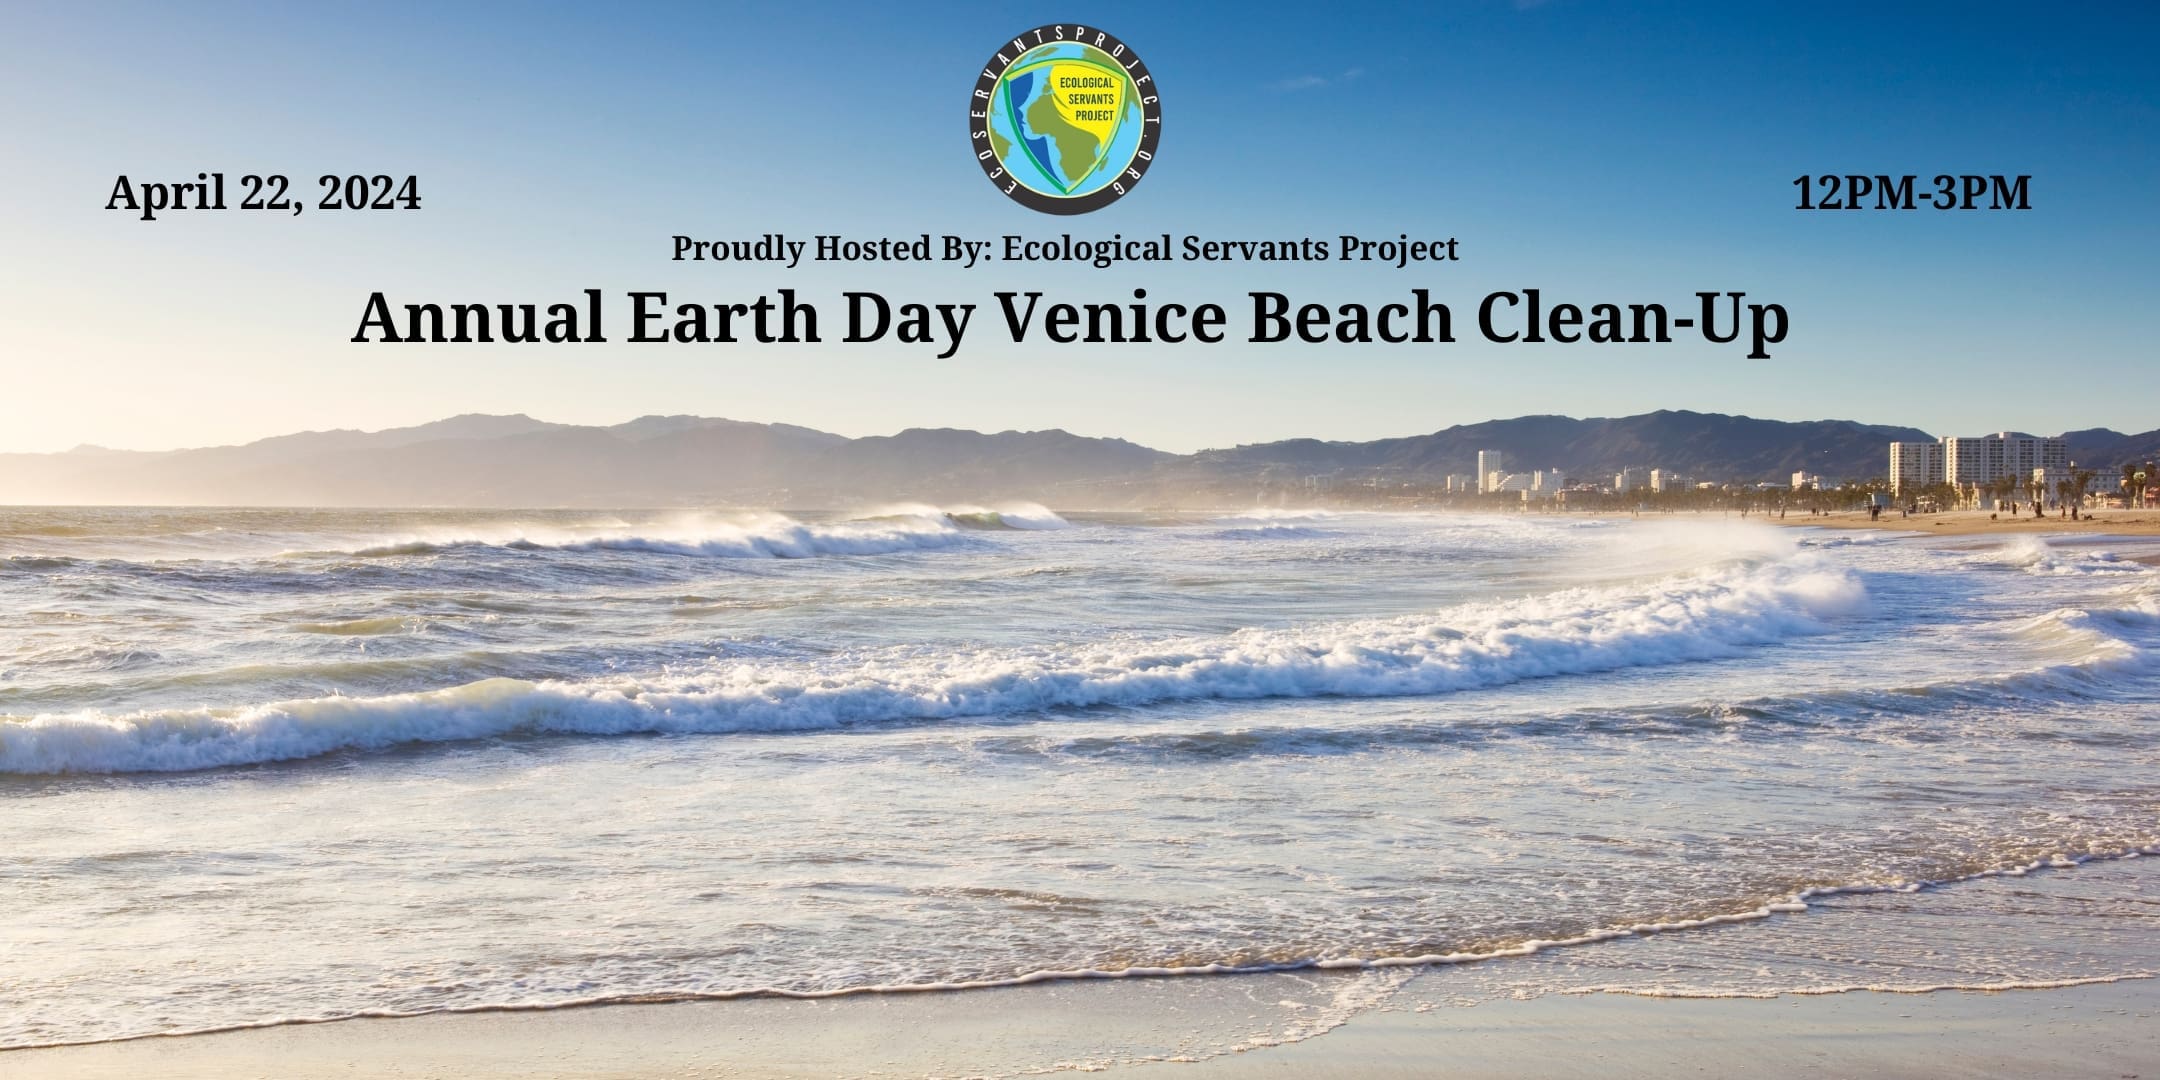 Annual Earth Day Venice Beach Clean-Up - Hosted by EcoServants Project